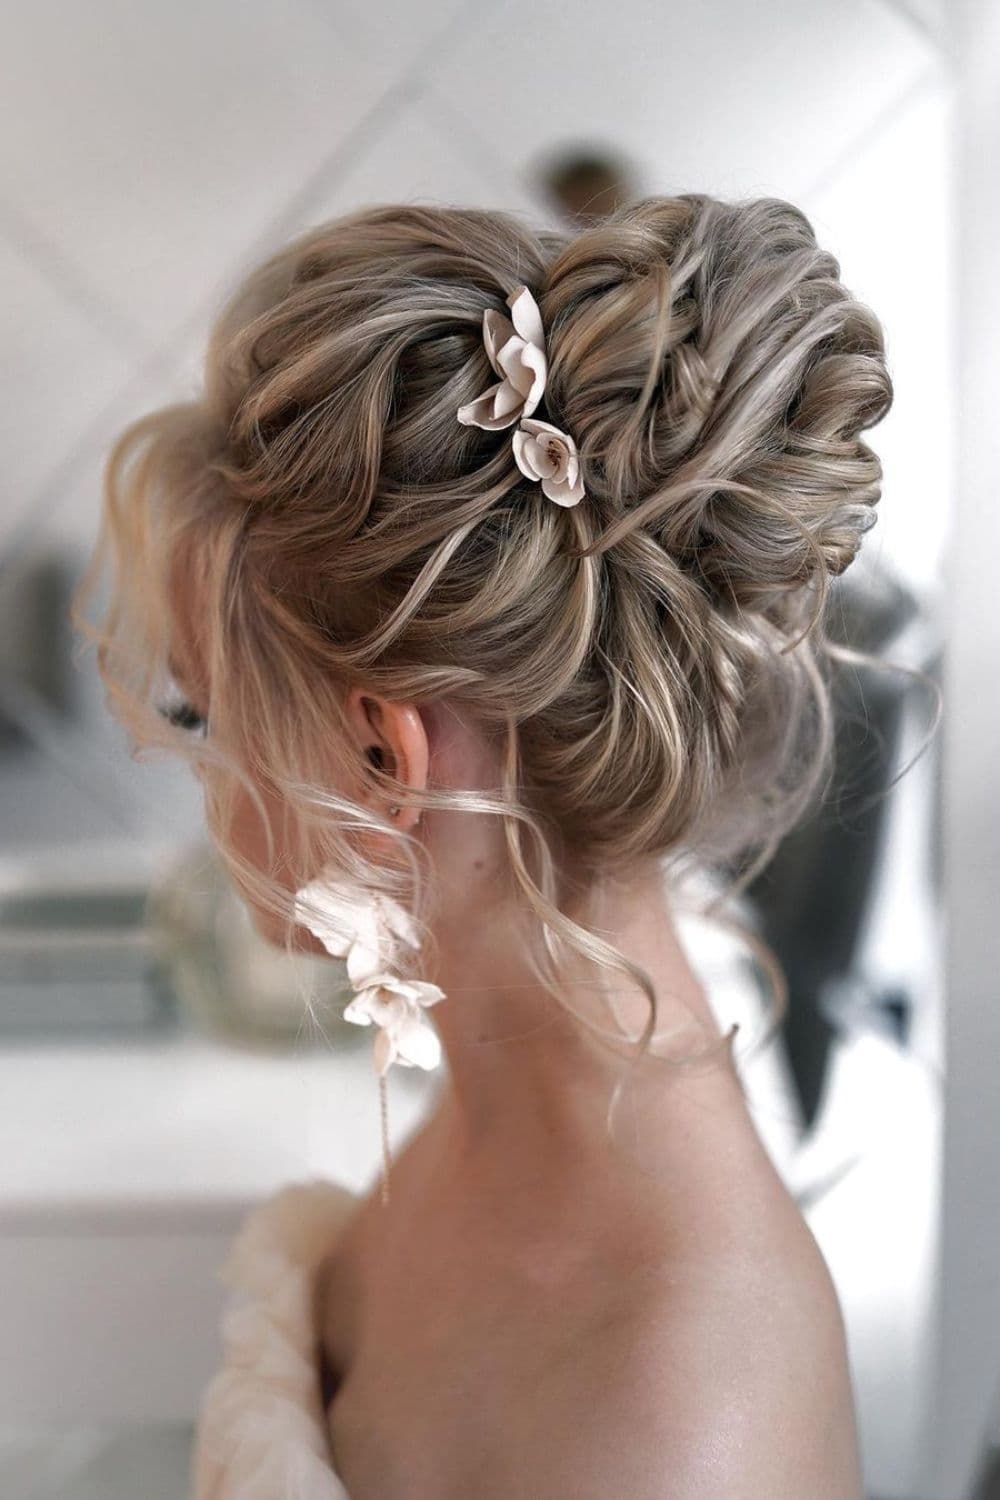 Side view of a woman with a blonde high bun with flowers accessories.